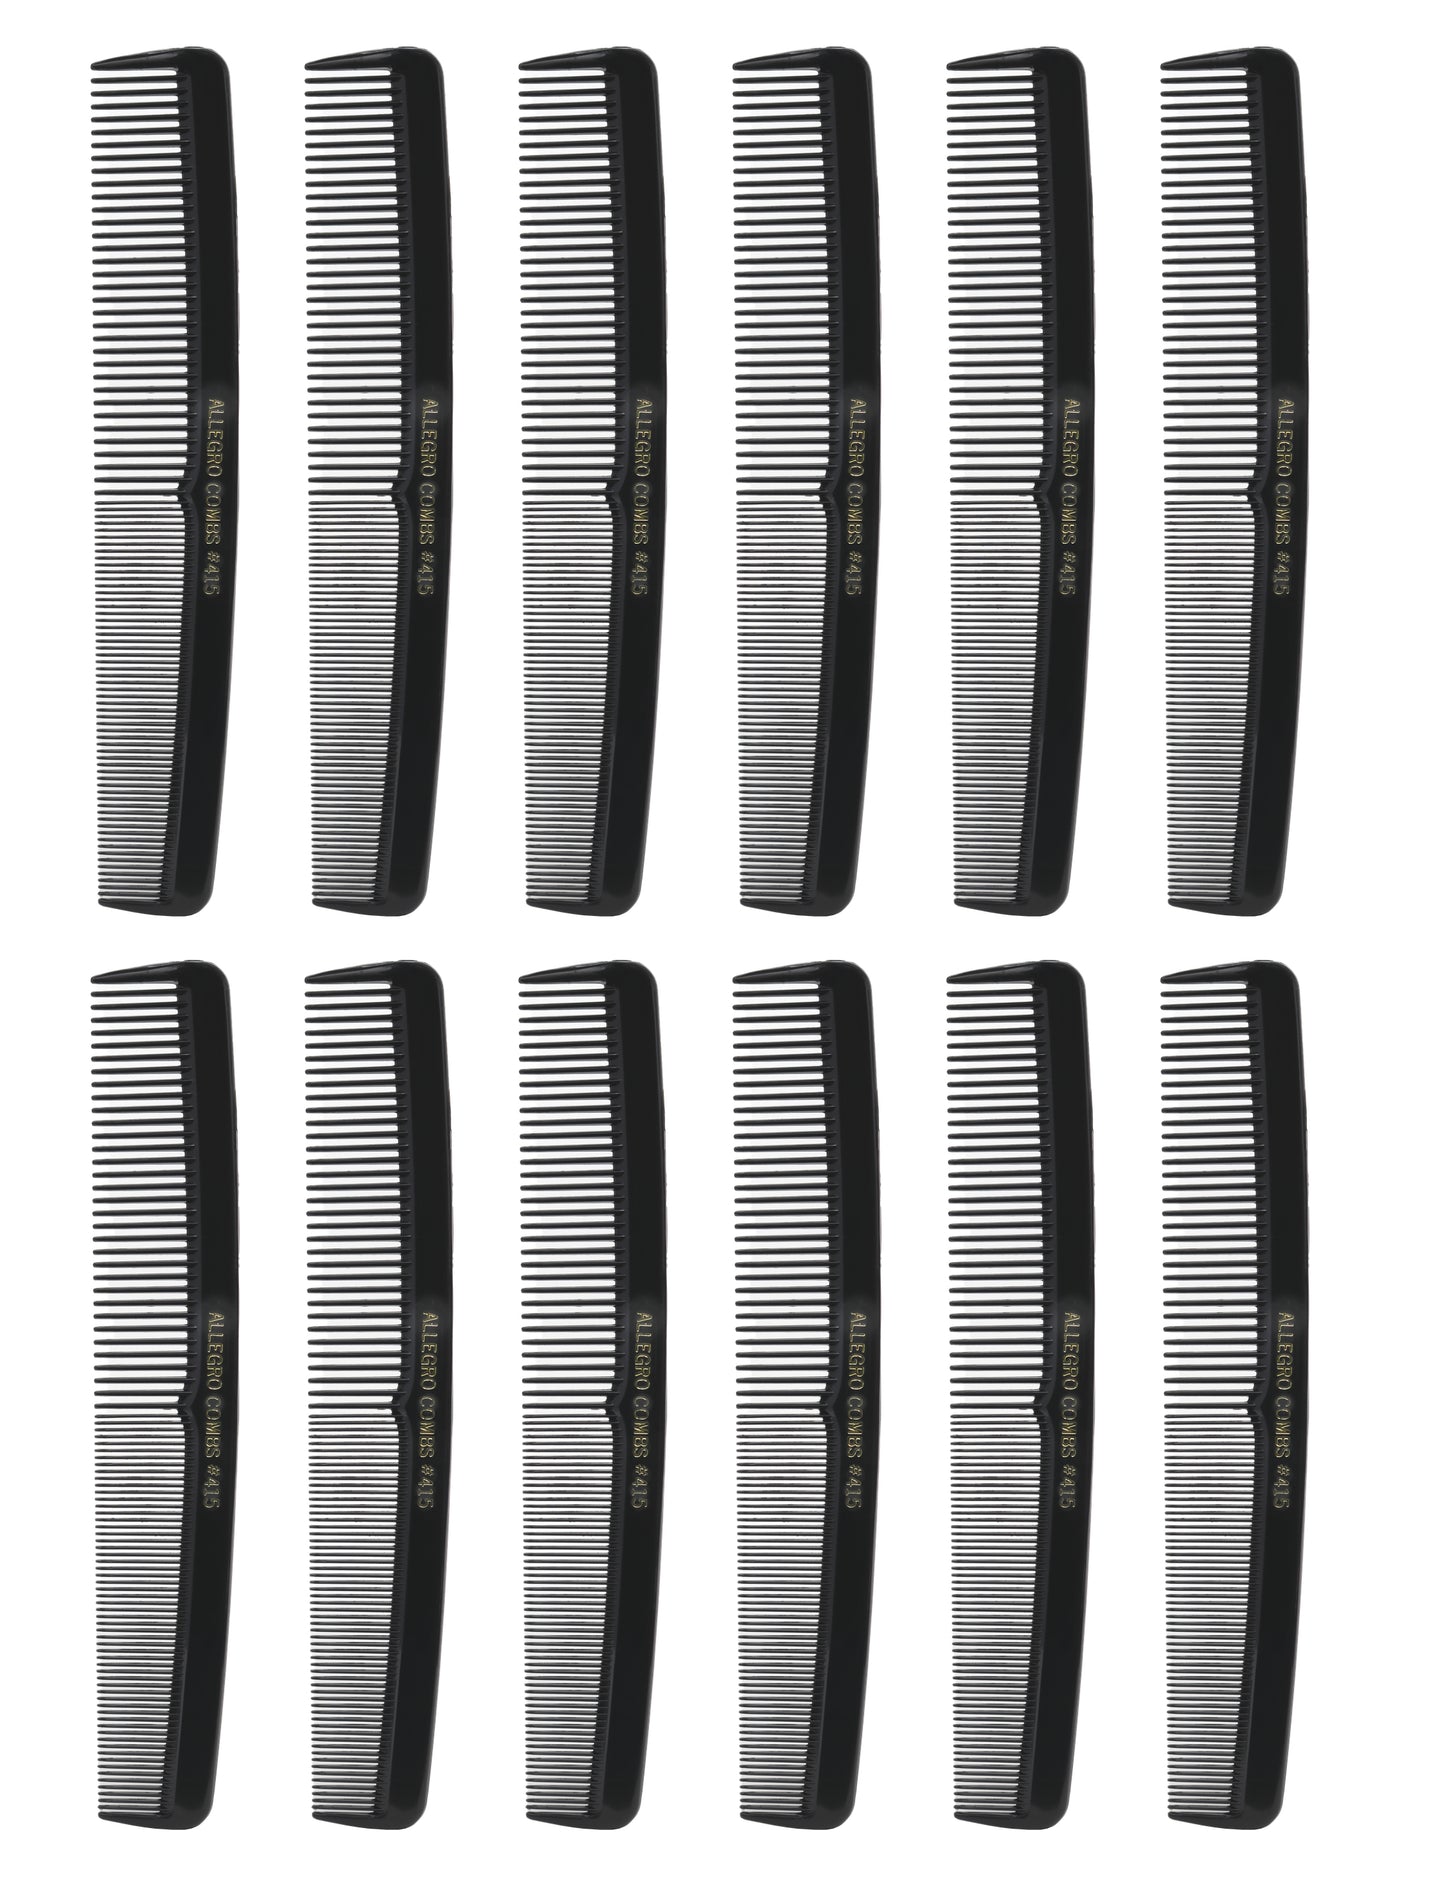 Allegro Combs 415 All Purpose Hair Combs Hair Styling combs Black Combs 12 Pcs.